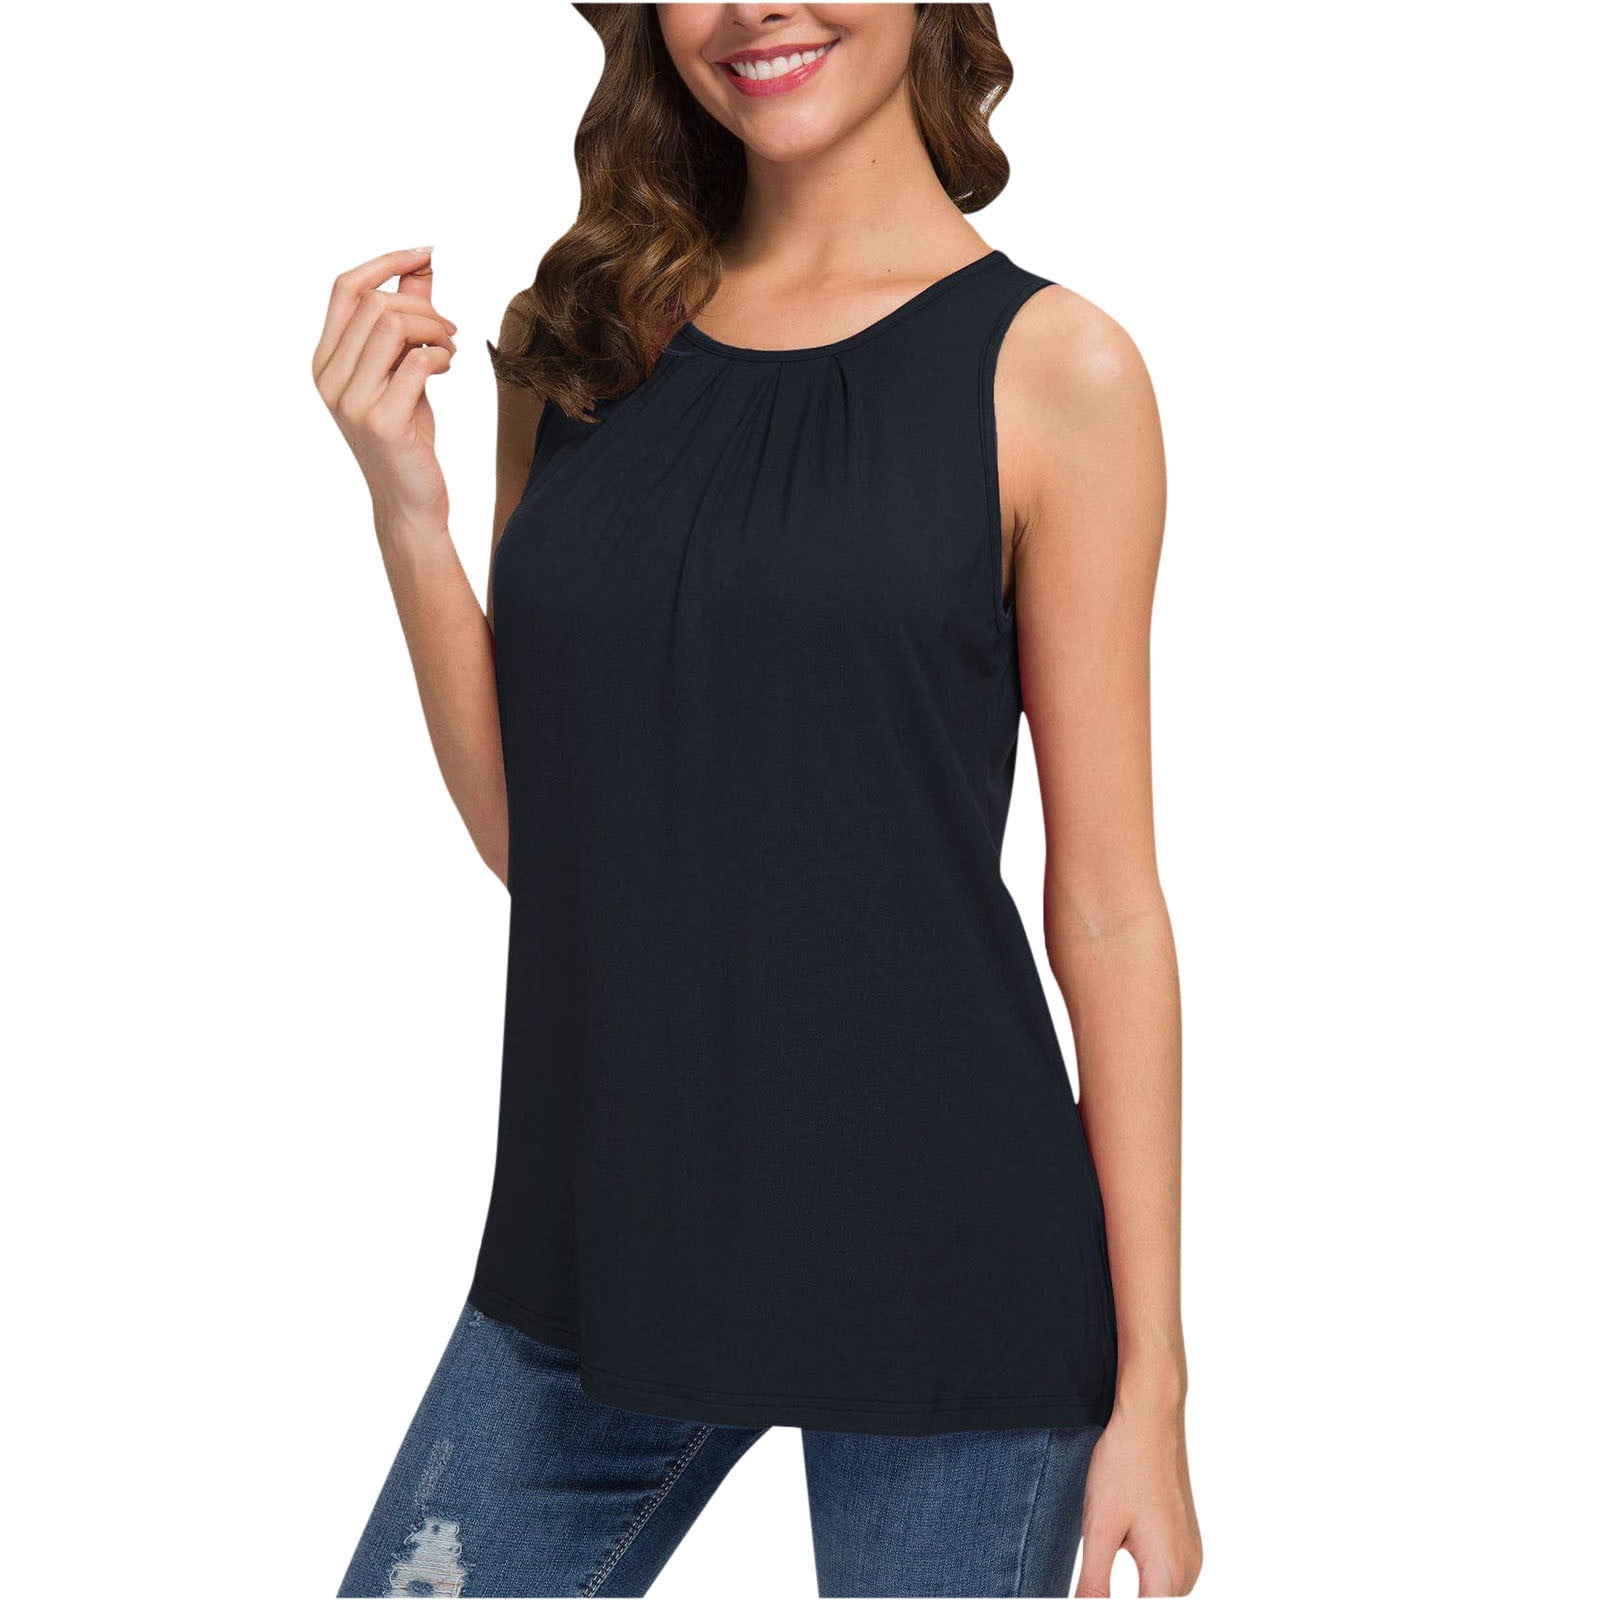 Scyoekwg Sleeveless Tops for Women Summer Trendy Tank Tops Solid Color Tees  Shirt Casual Round Neck Relaxed Fit Breathable Tank Tops Clearance Navy